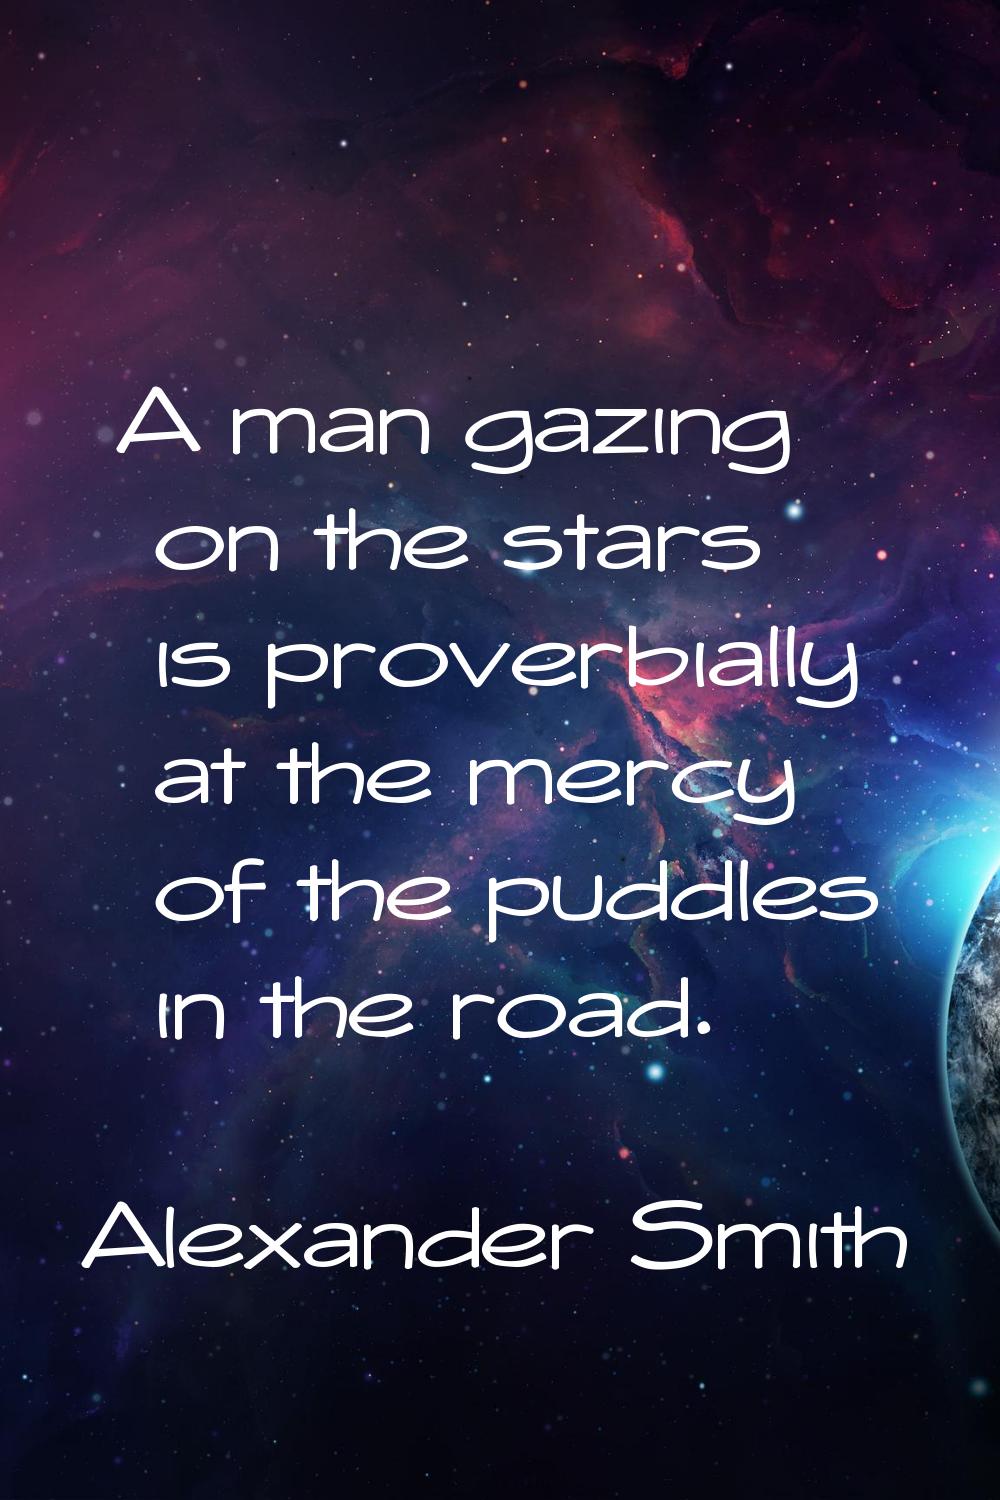 A man gazing on the stars is proverbially at the mercy of the puddles in the road.